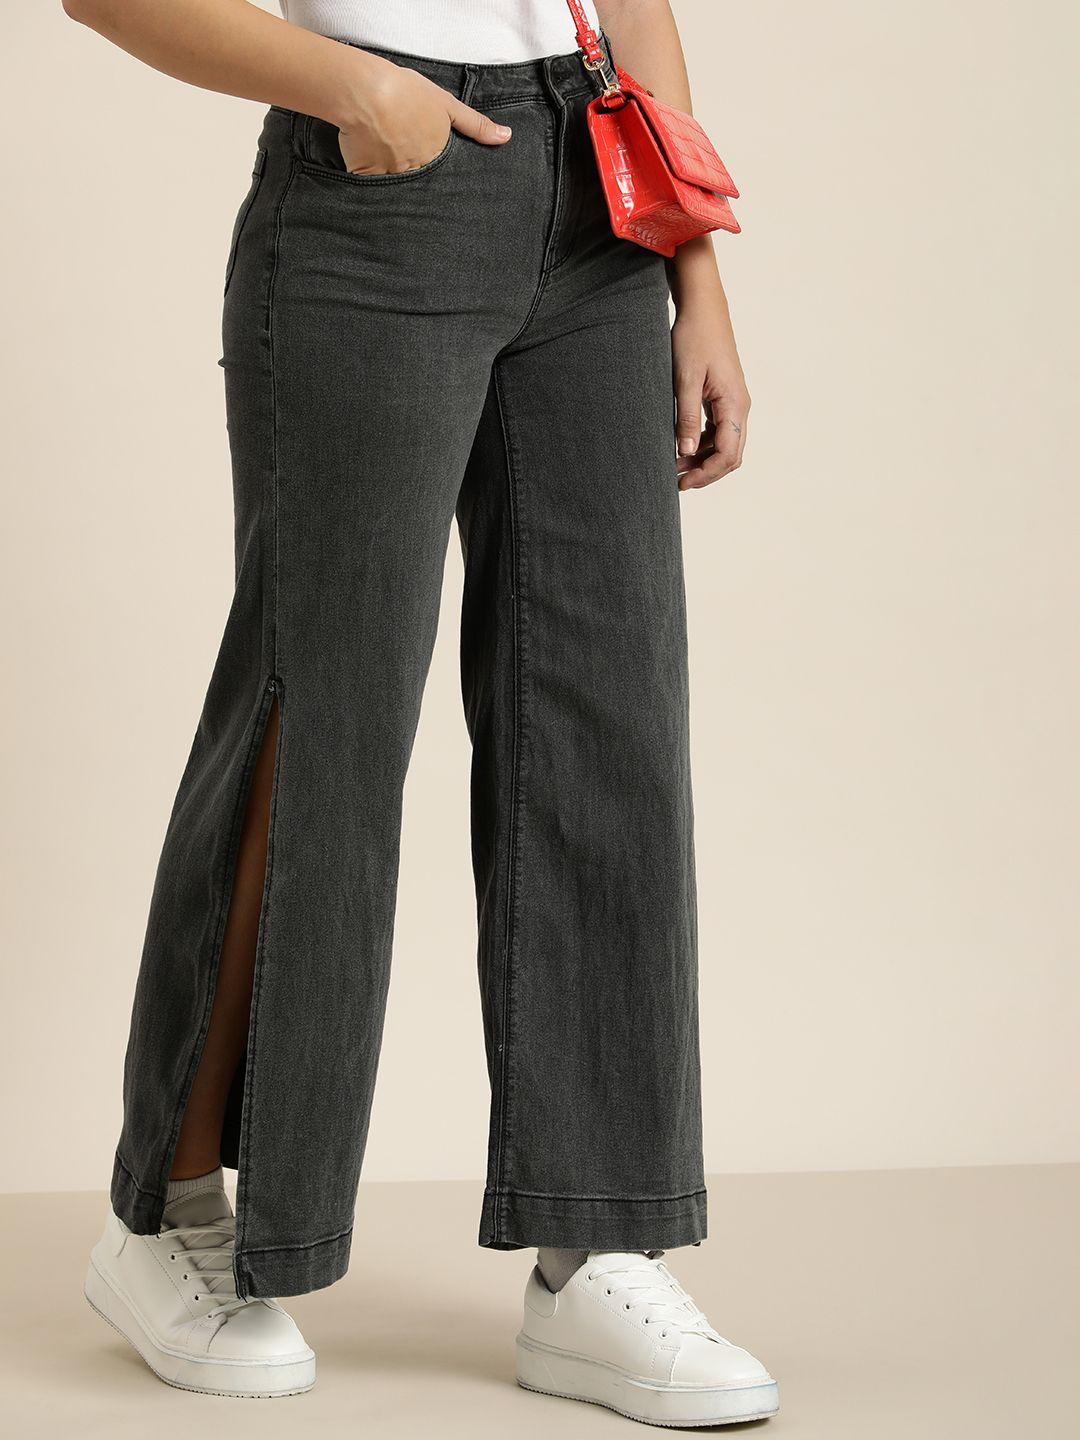 here&now women wide leg light fade stretchable jeans with side slits